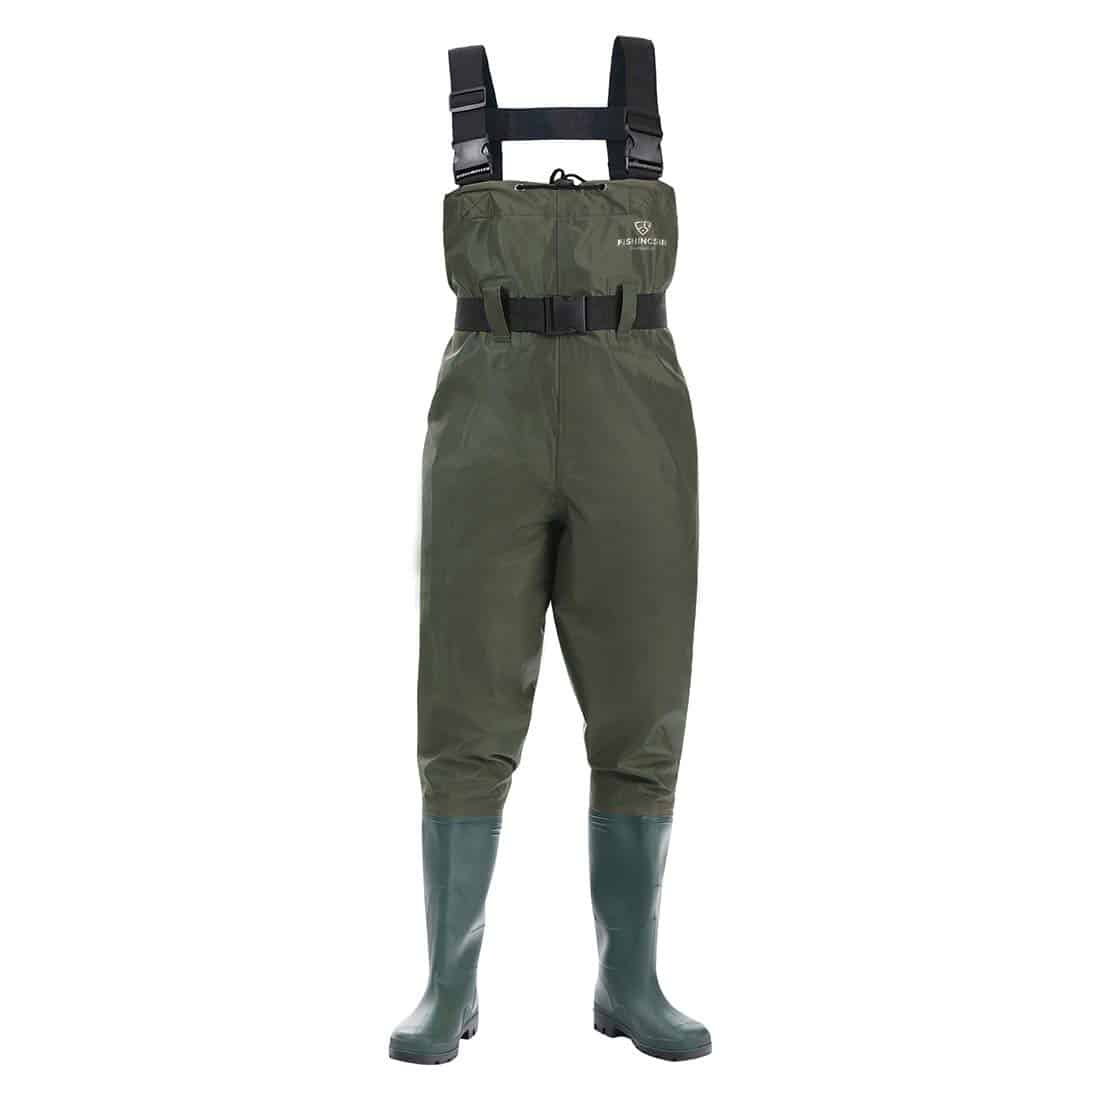 Top 10 Best Chest Waders in 2023 Reviews & Guide